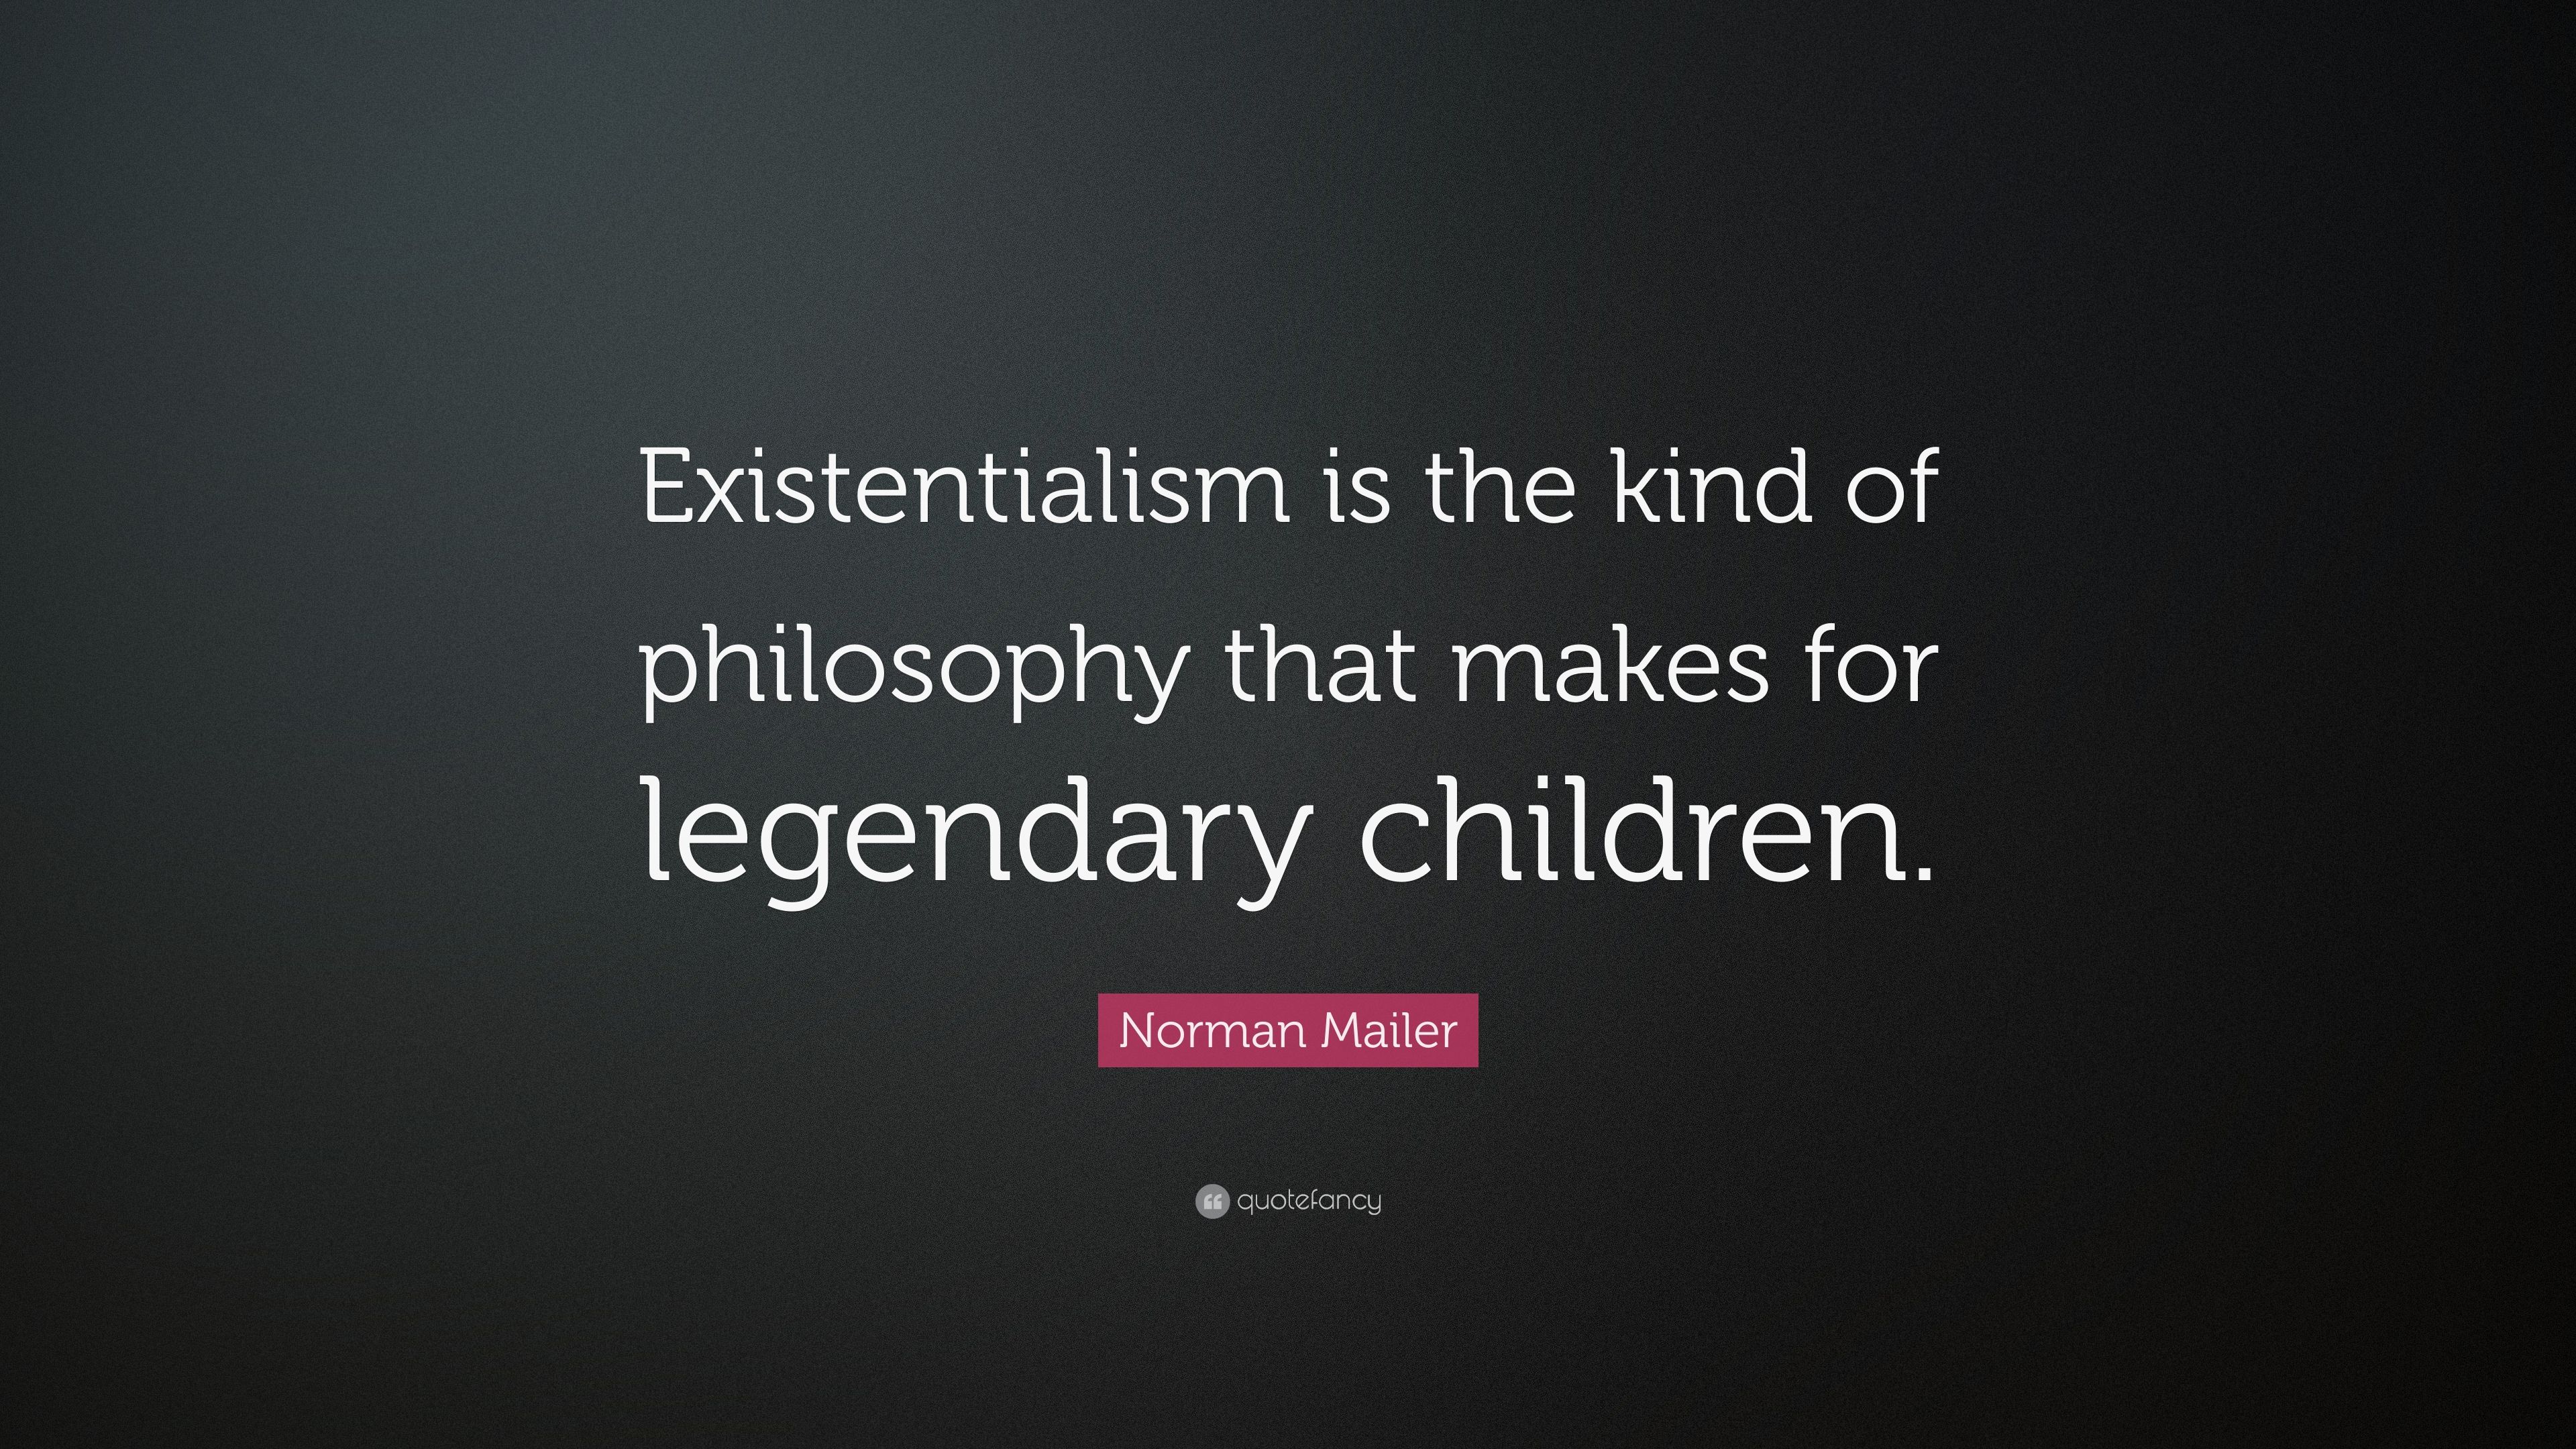 Norman Mailer Quote: “Existentialism is the kind of philosophy that makes for legendary children.”